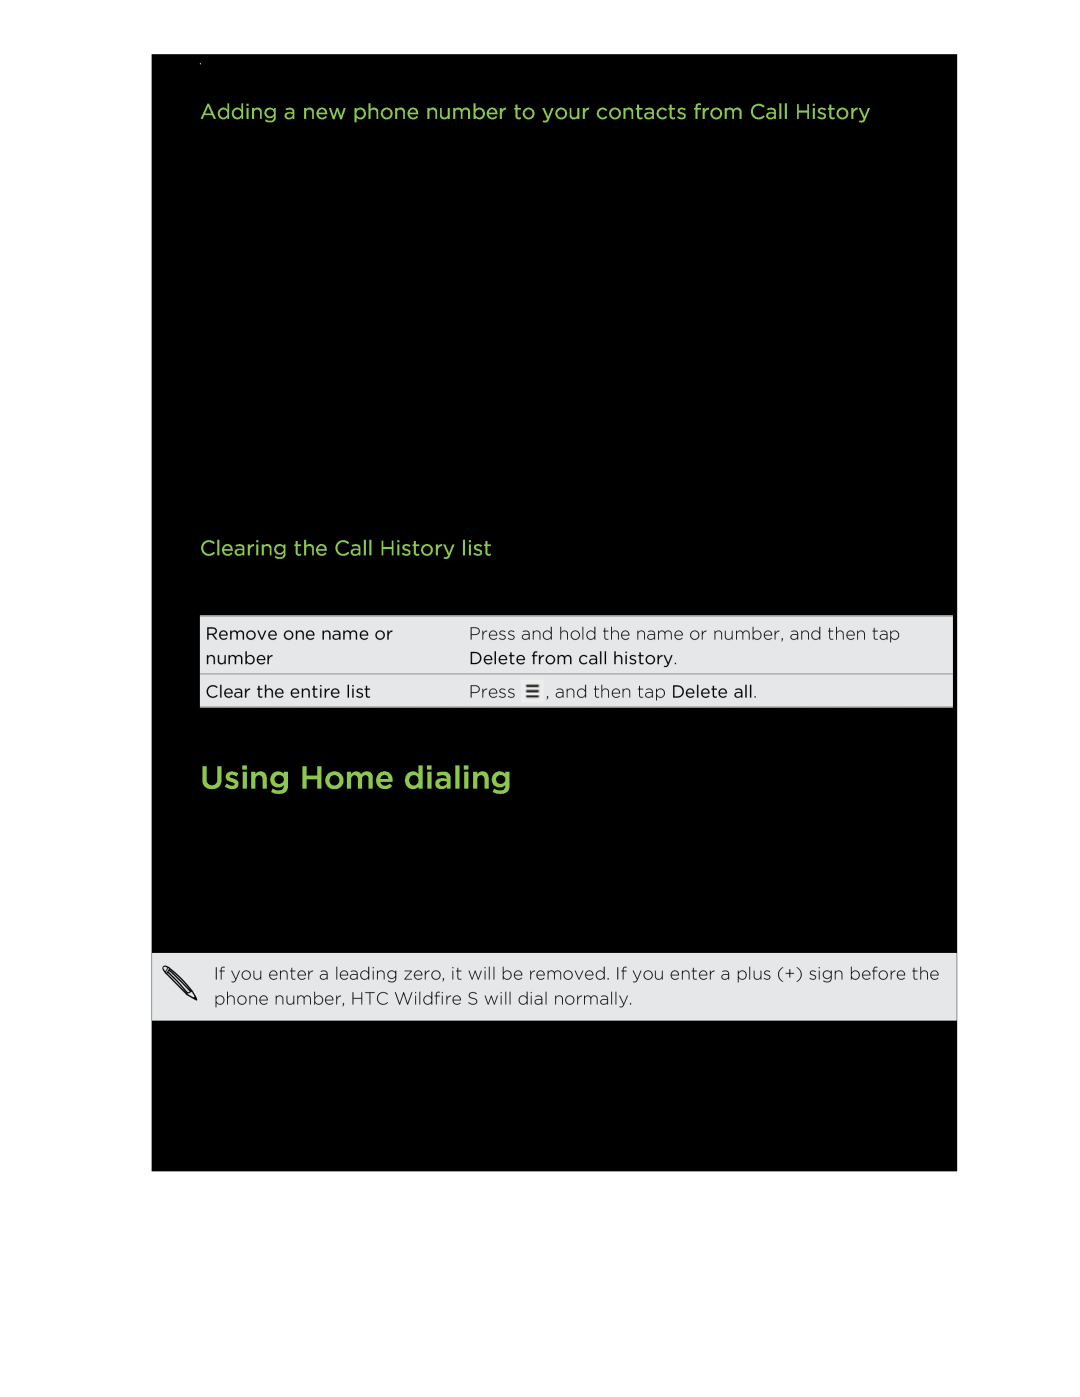 HTC S Using Home dialing, Adding a new phone number to your contacts from Call History, Clearing the Call History list 